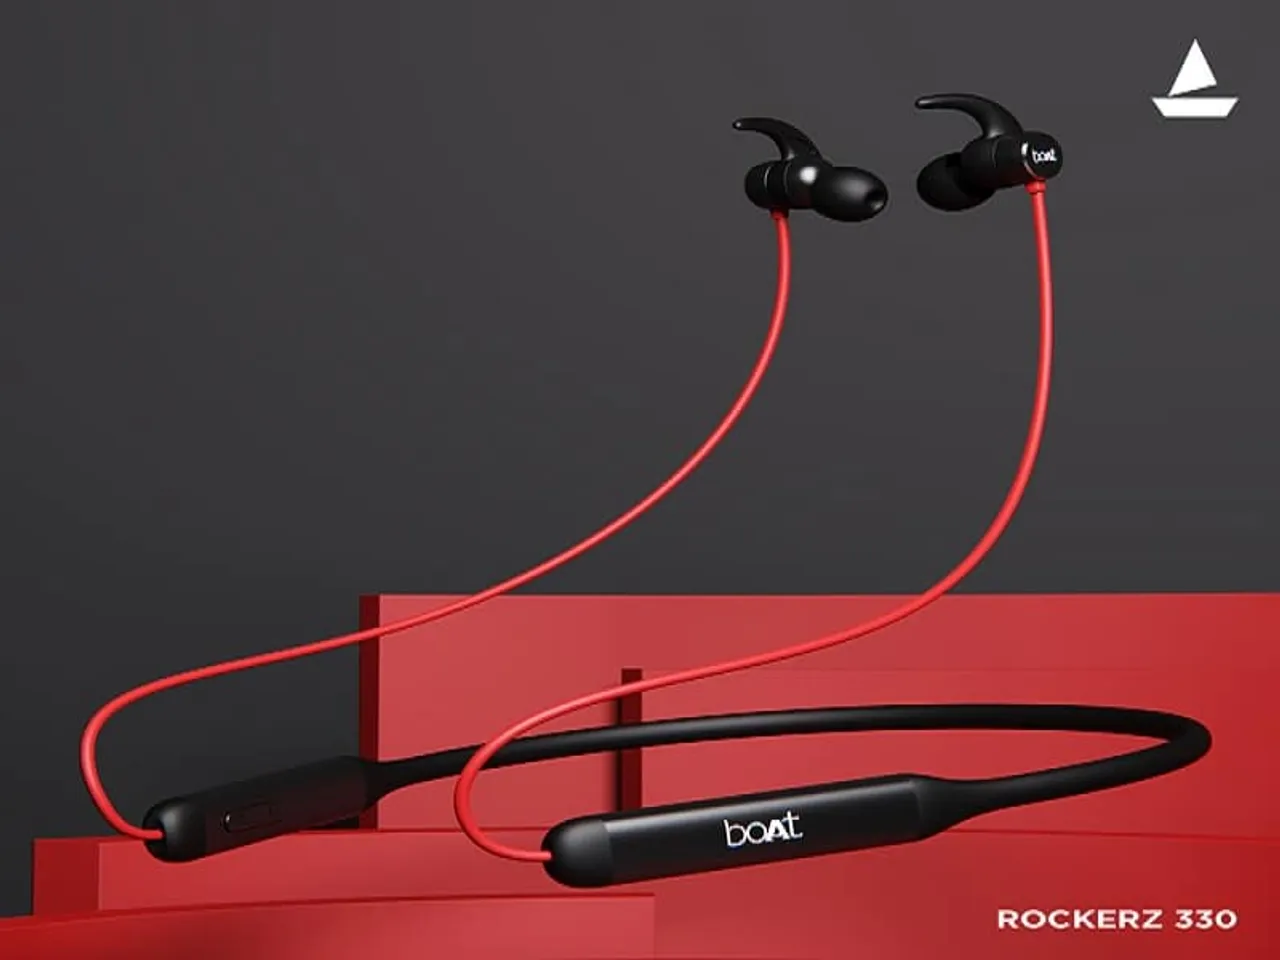 boAt Rockerz Set to Come Out with Better Battery and boAt Signature Sound